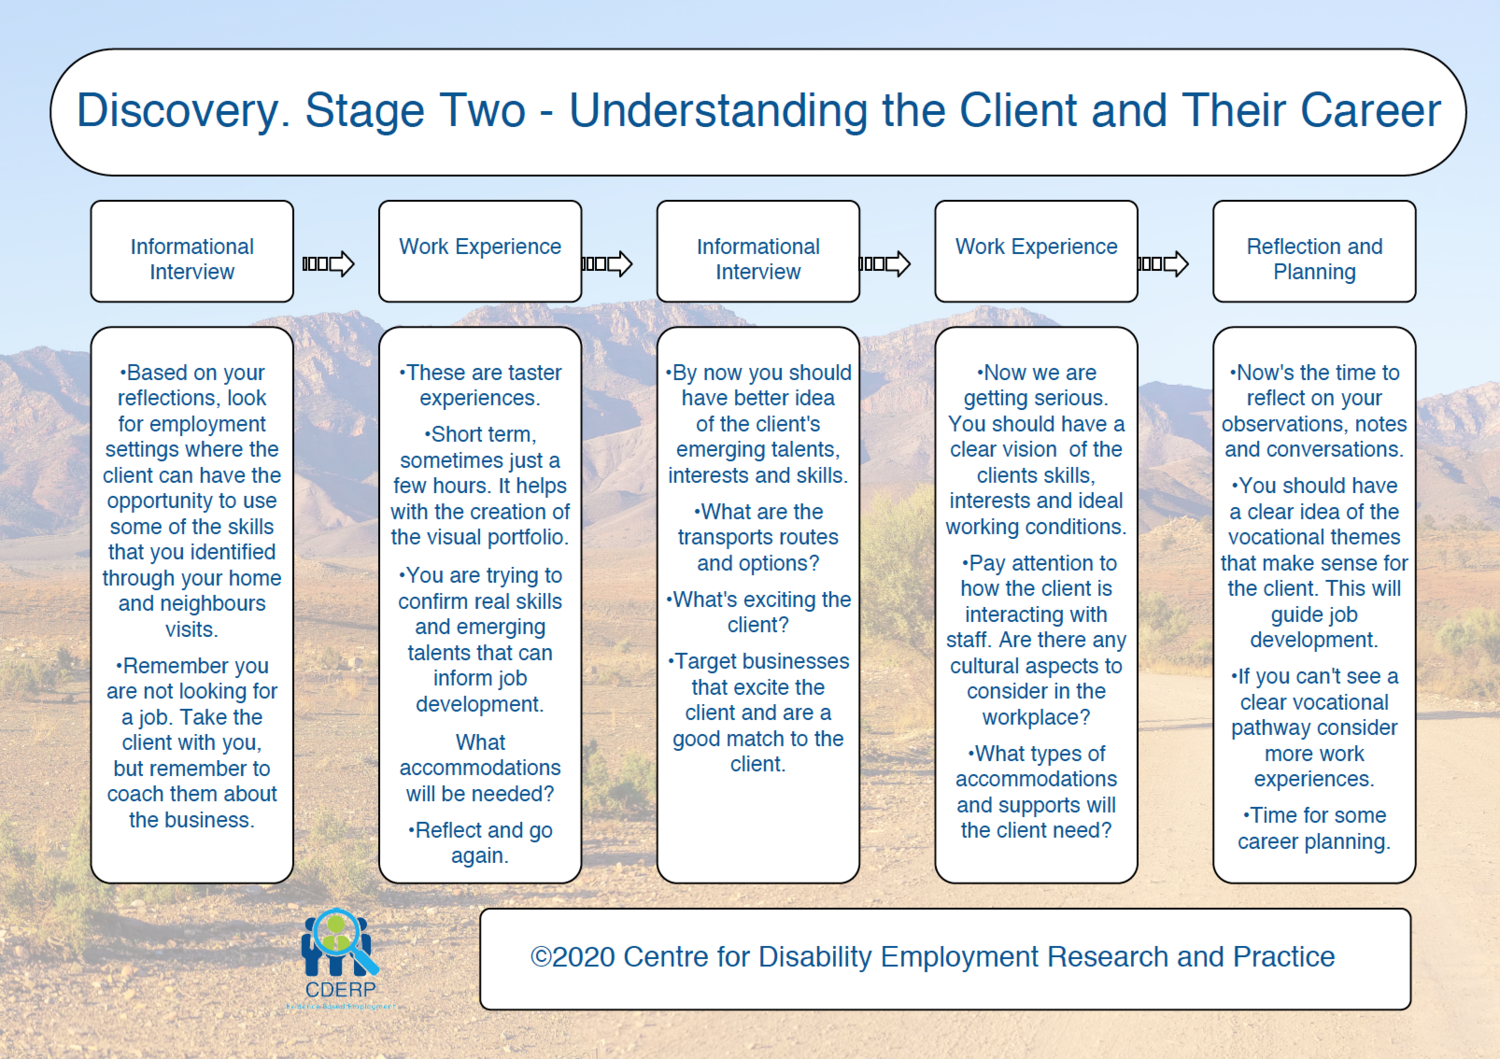 Discovery Stage Two Chart - Understanding the Client and Their Career ©